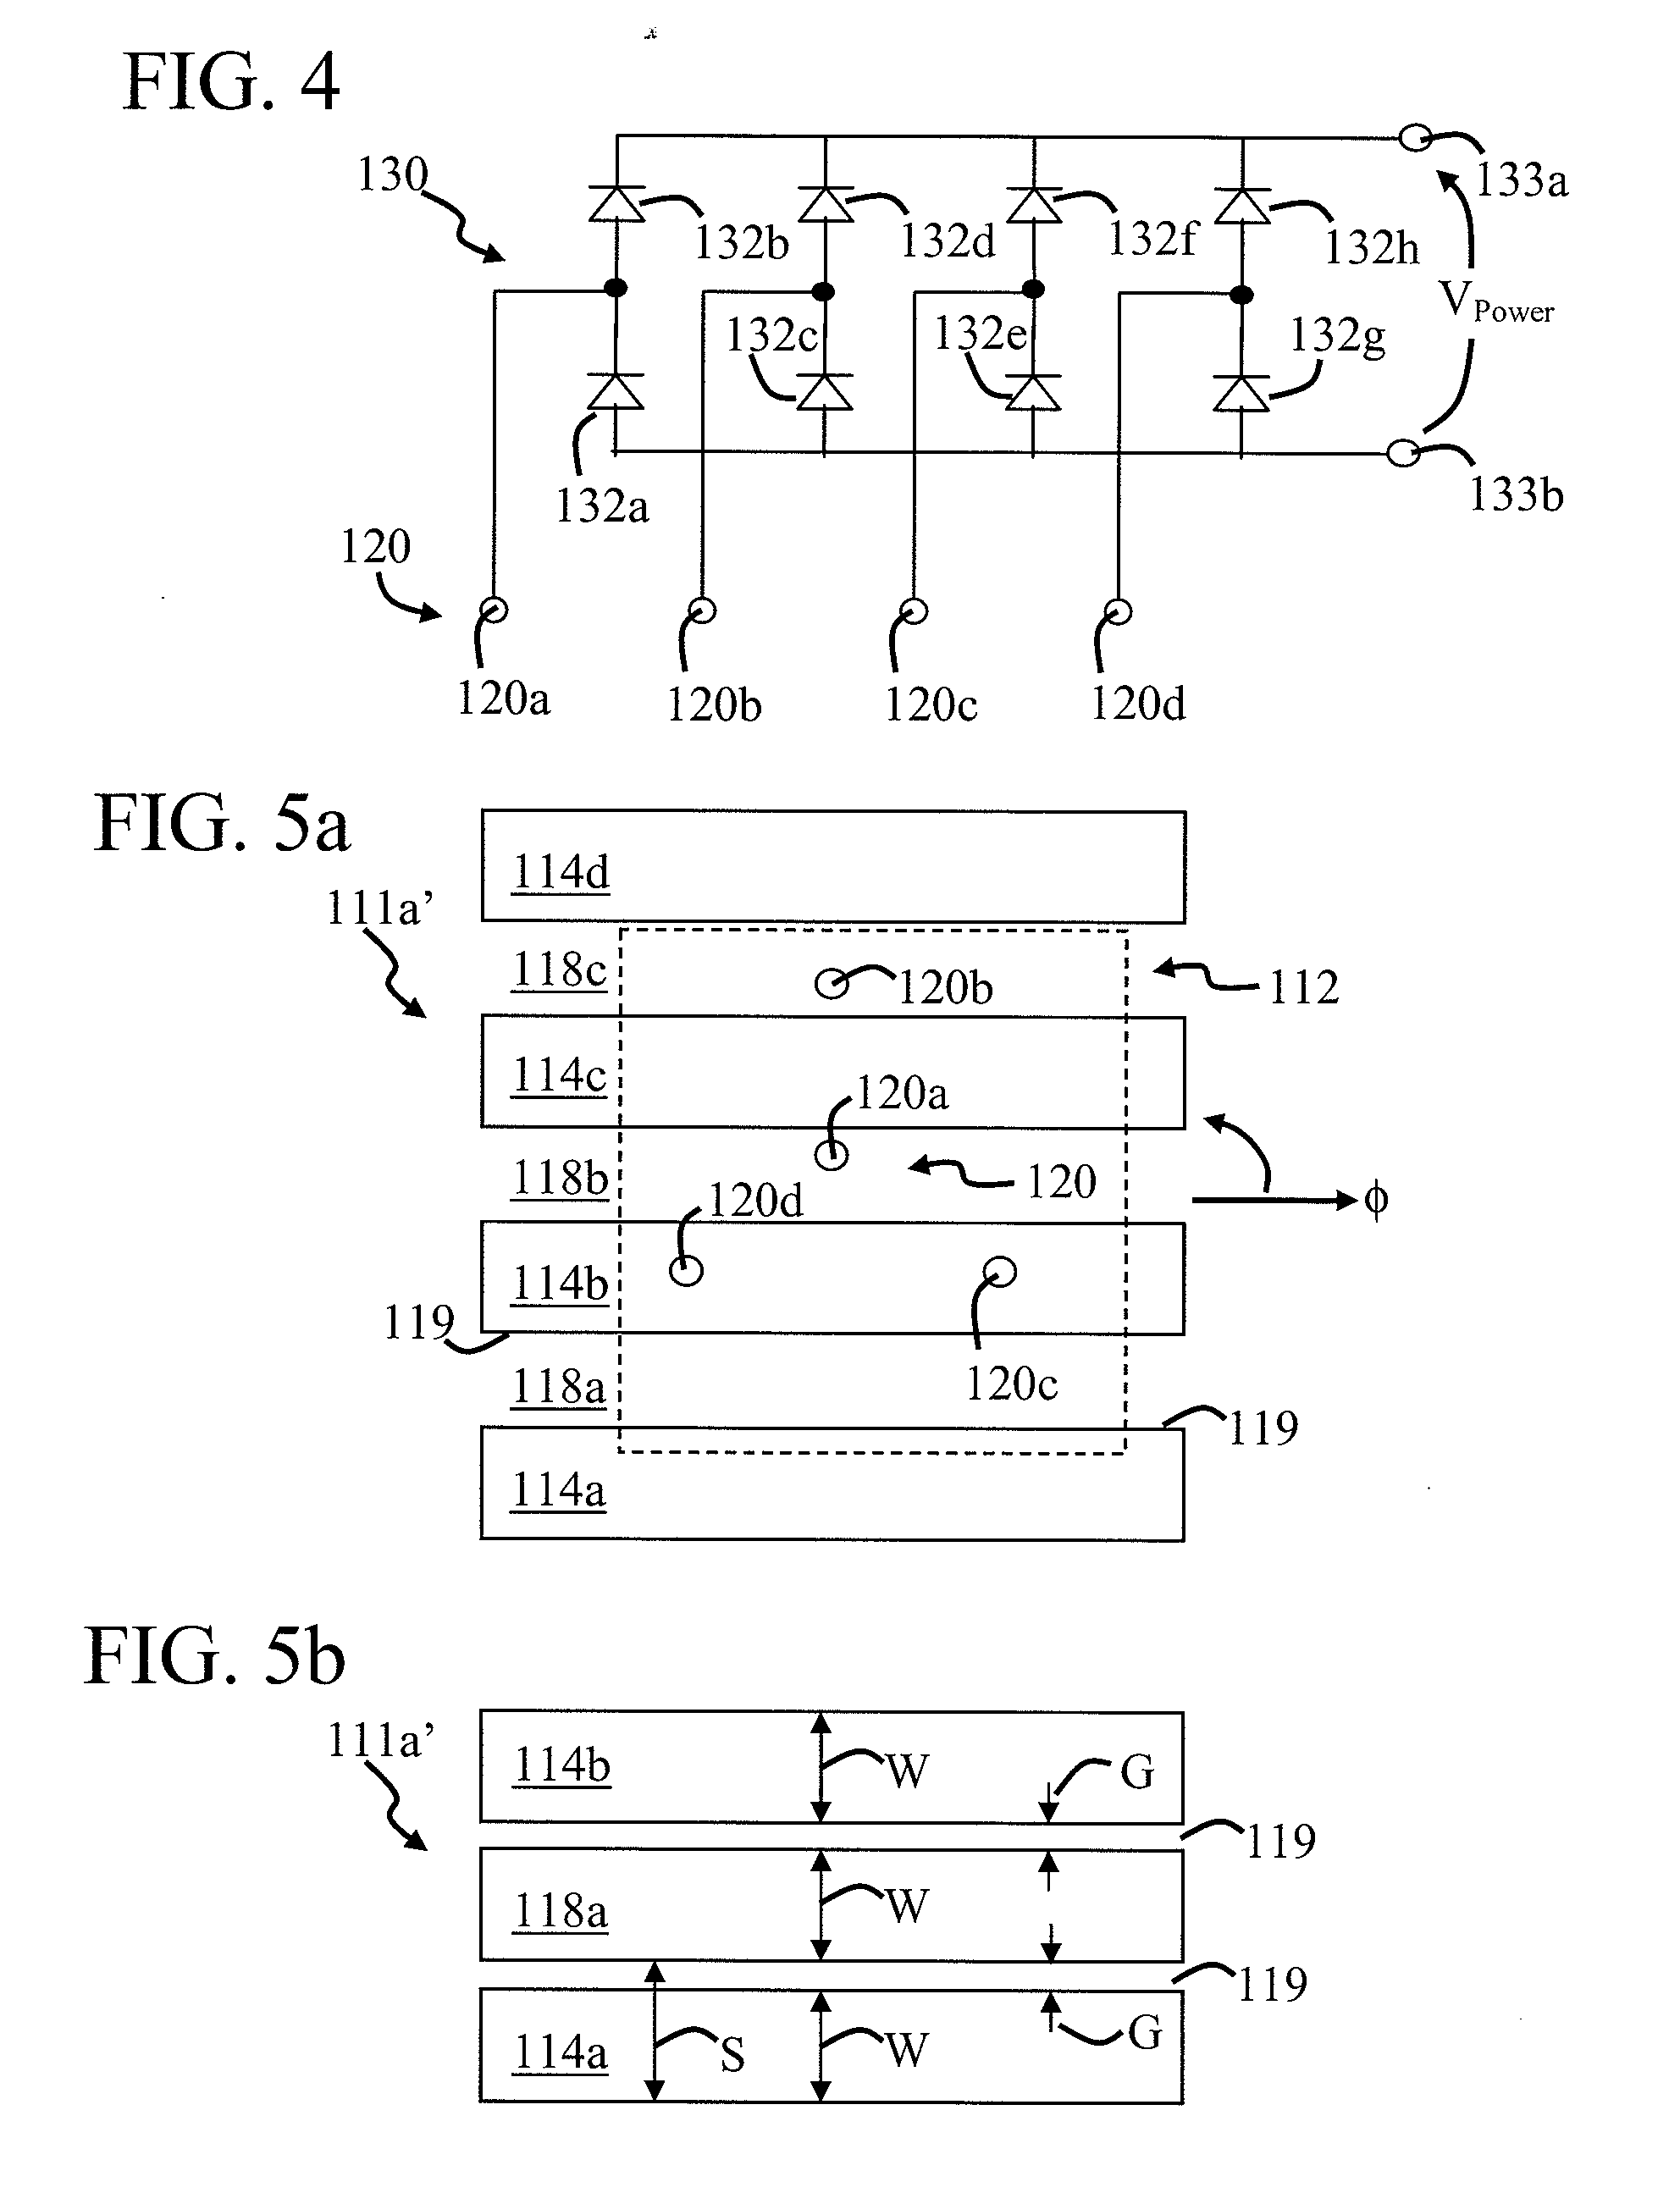 System and method for providing power to an electronic device